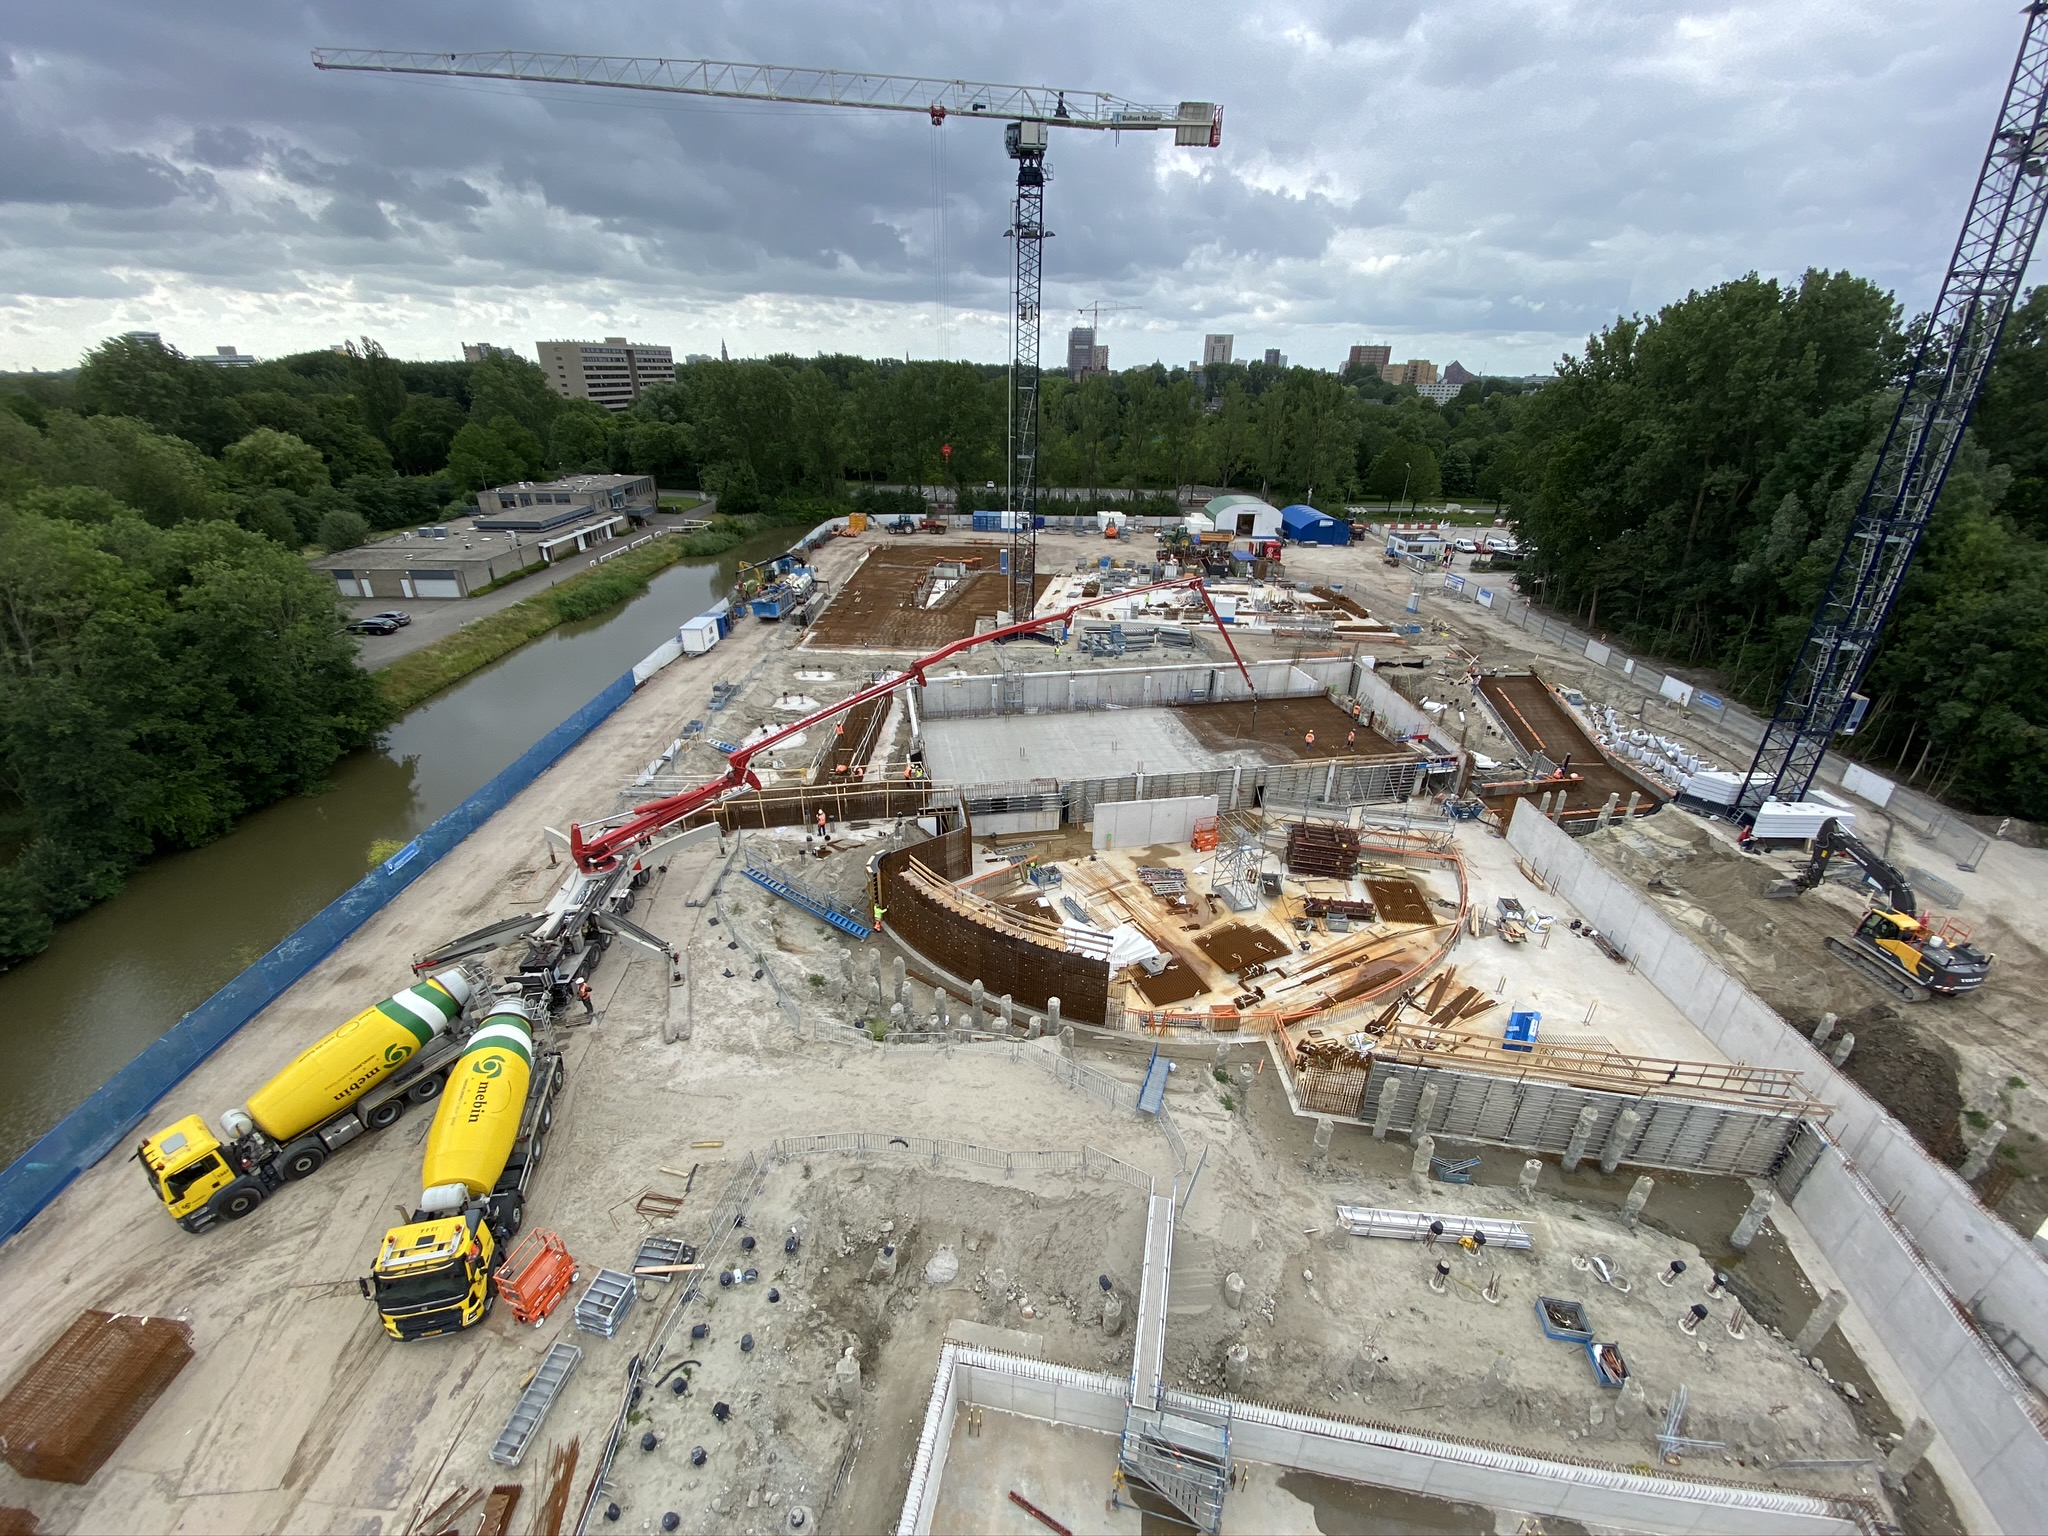 June 2020 | Pouring of cement in the clean rooms